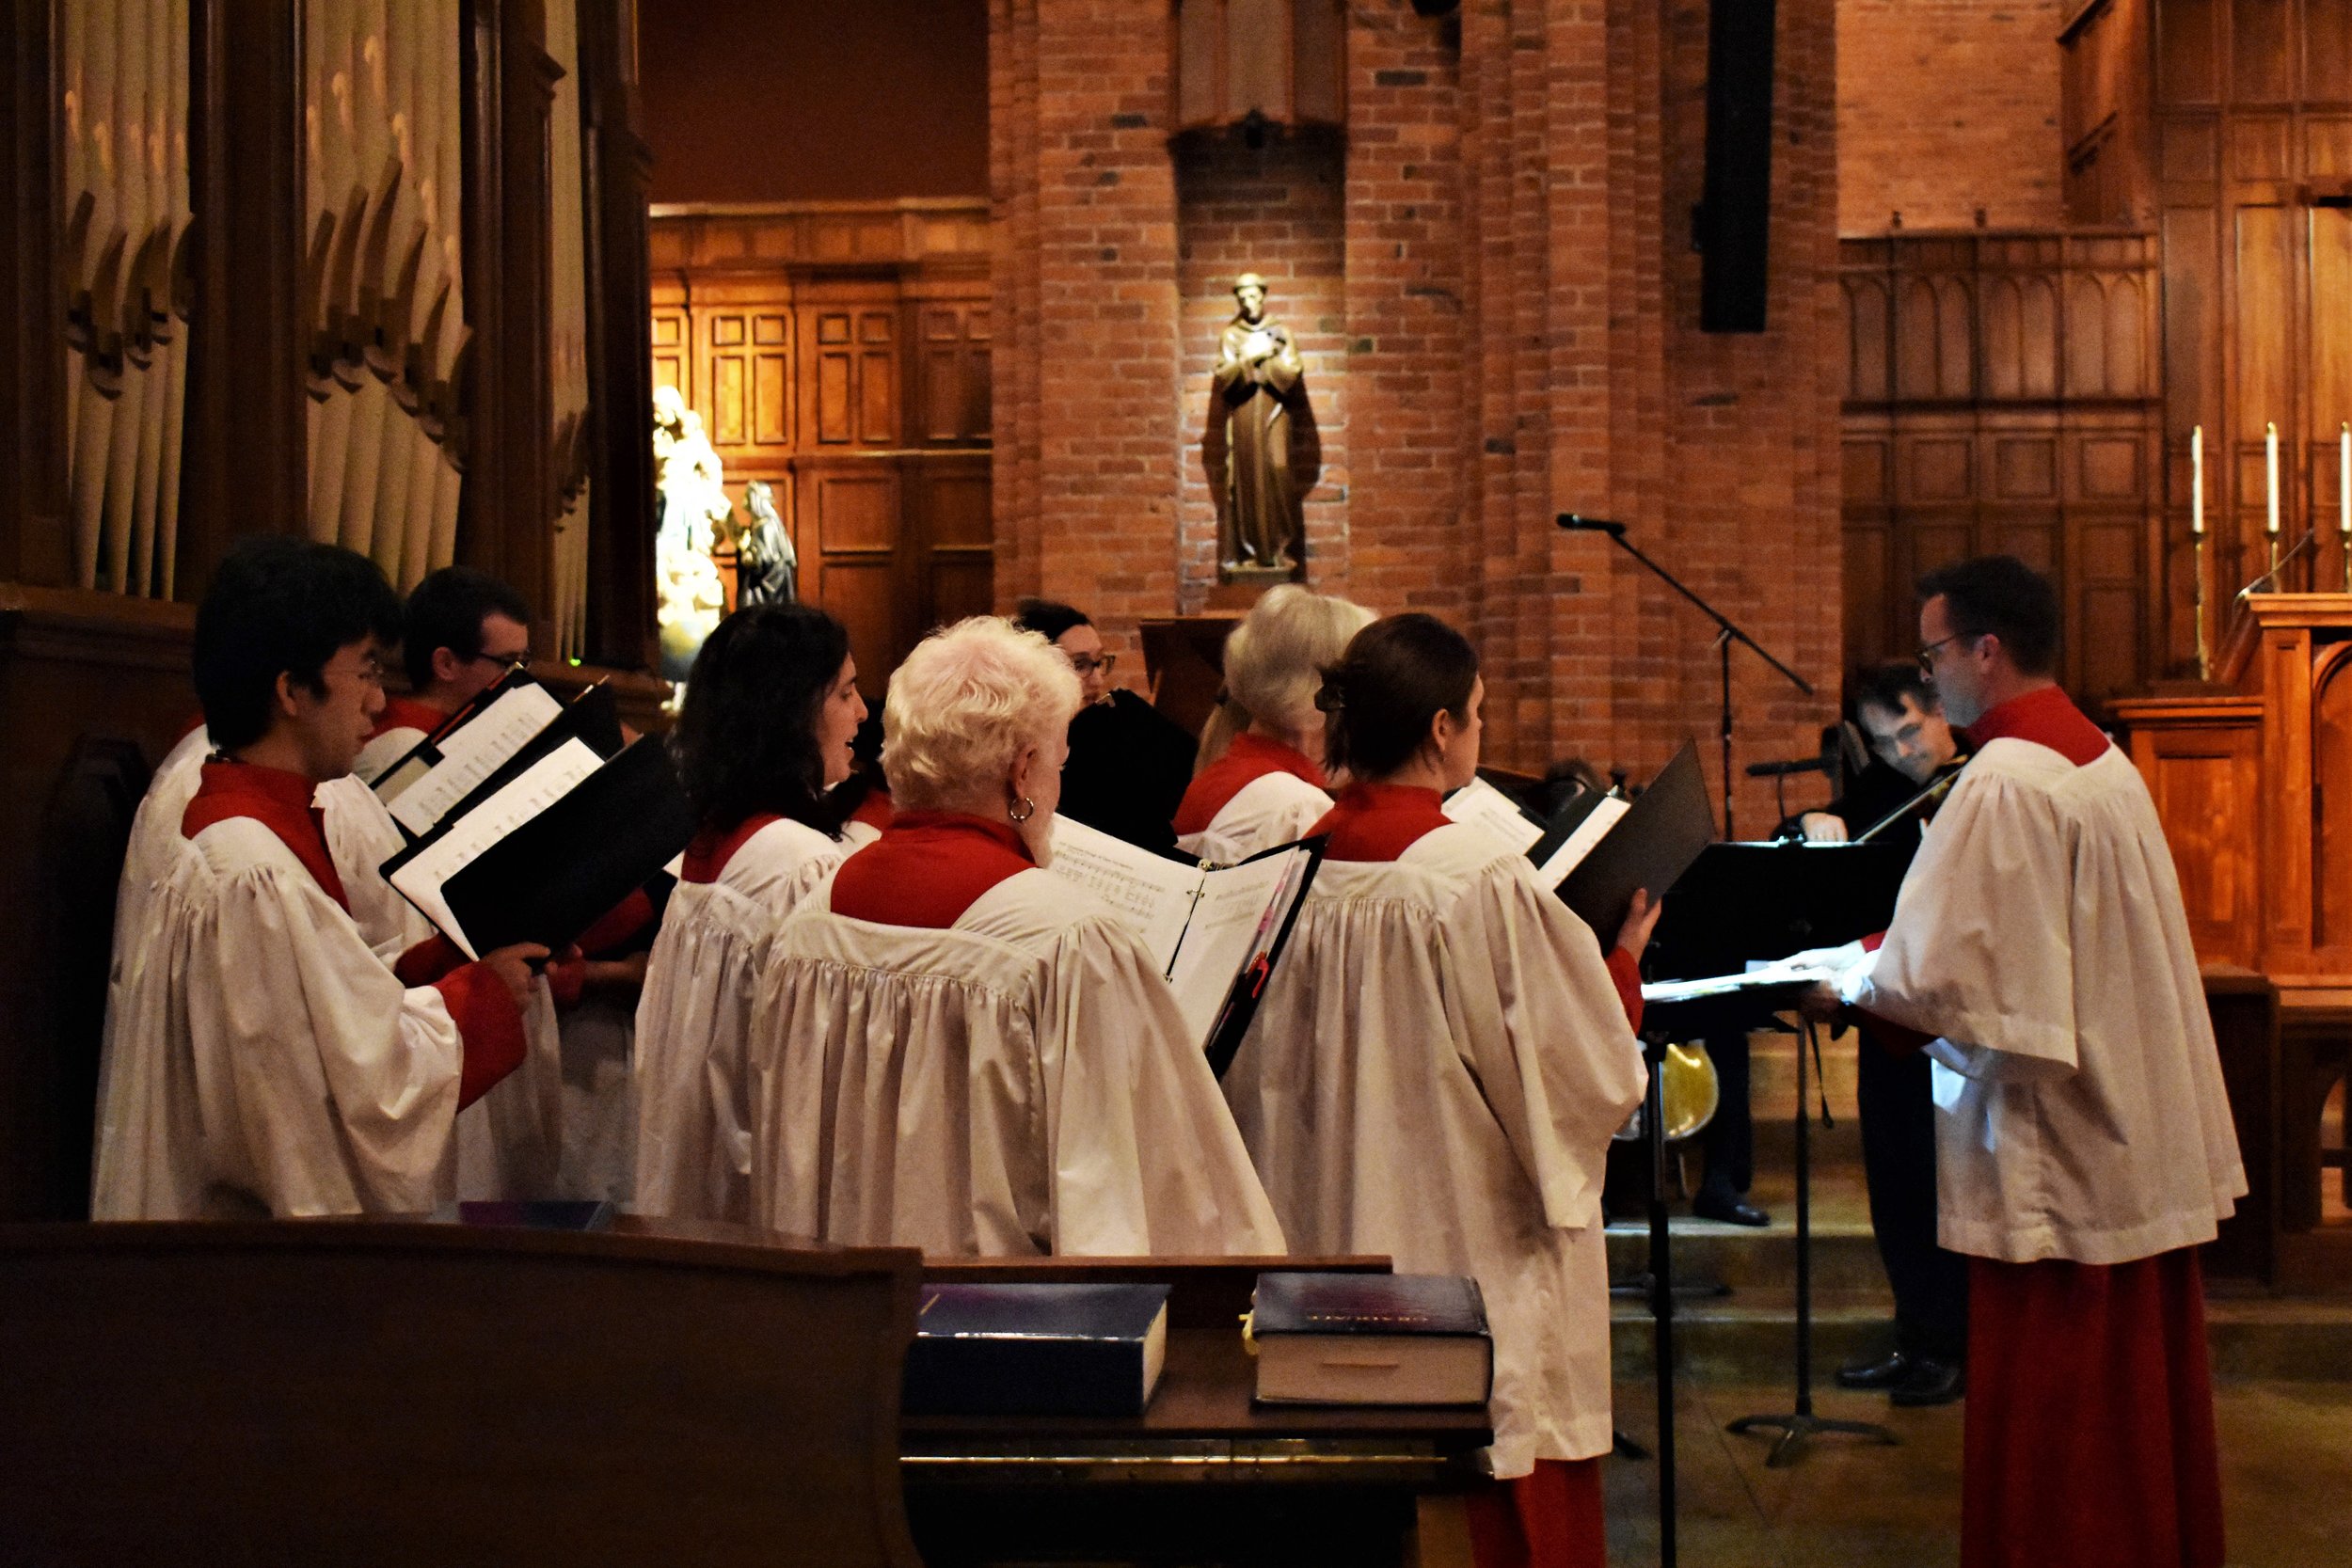 March 2019 Choral Mass